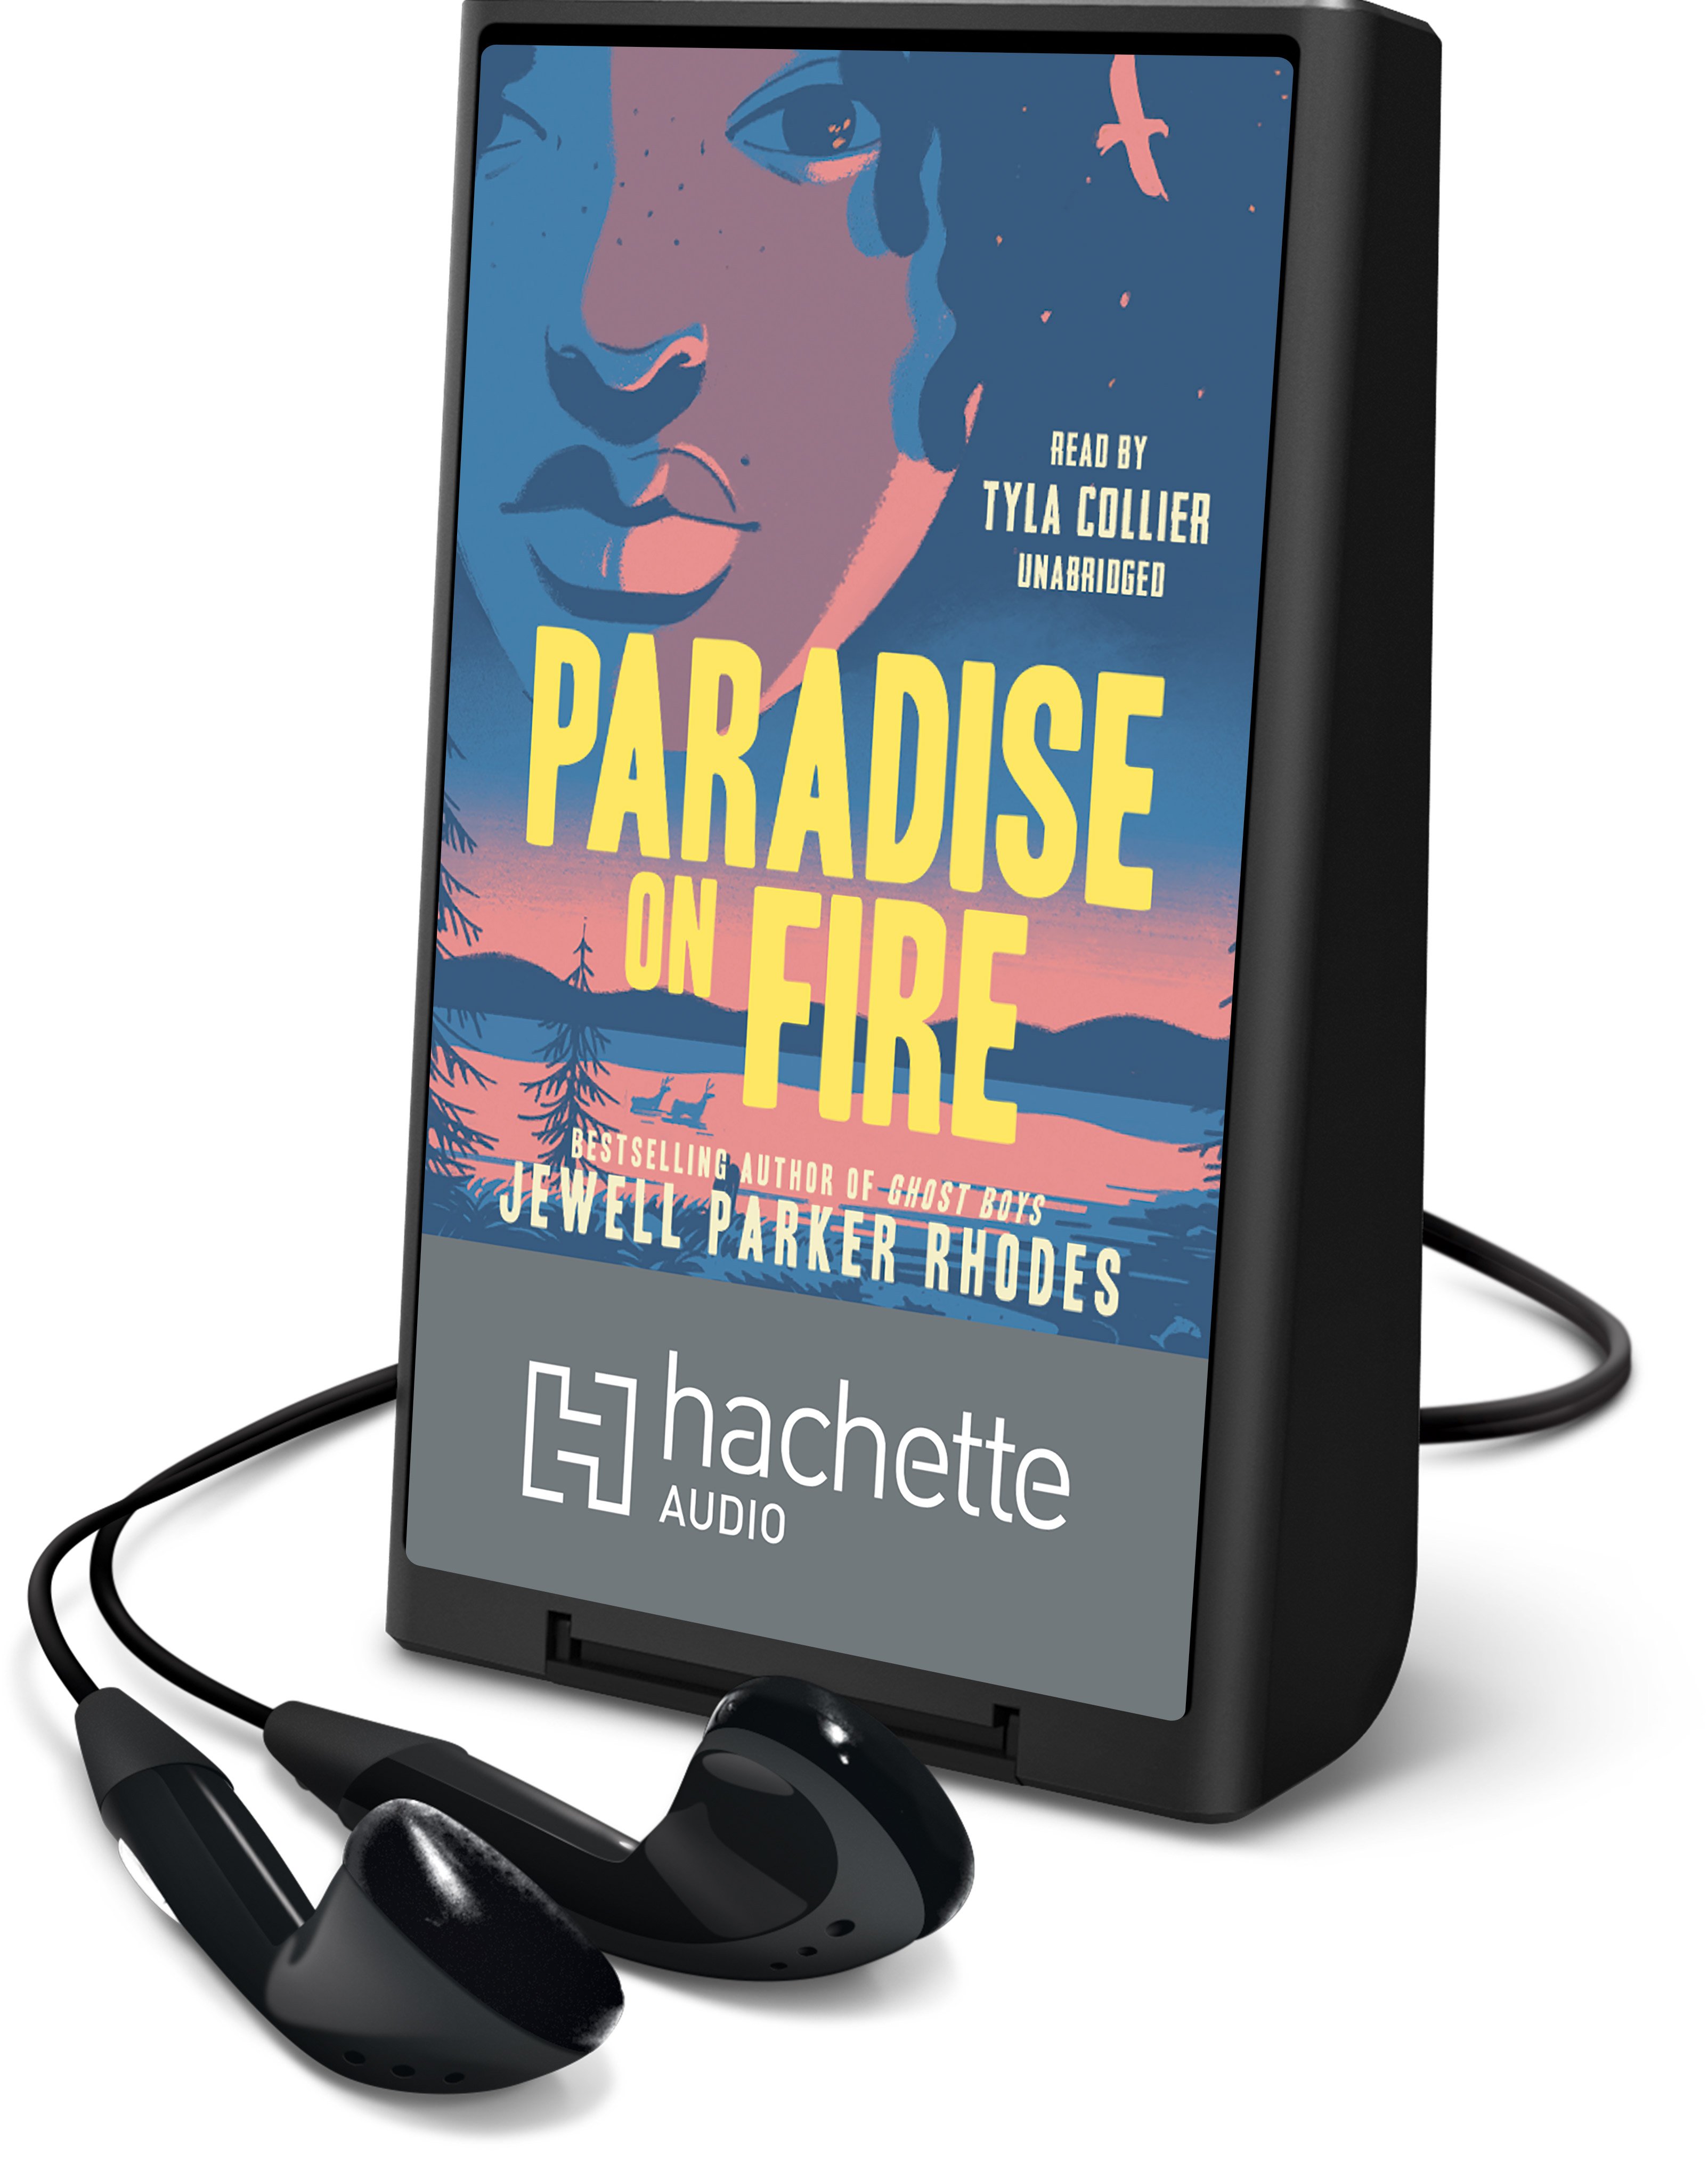 Paradise on fire Jewell Parker Rhodes. cover